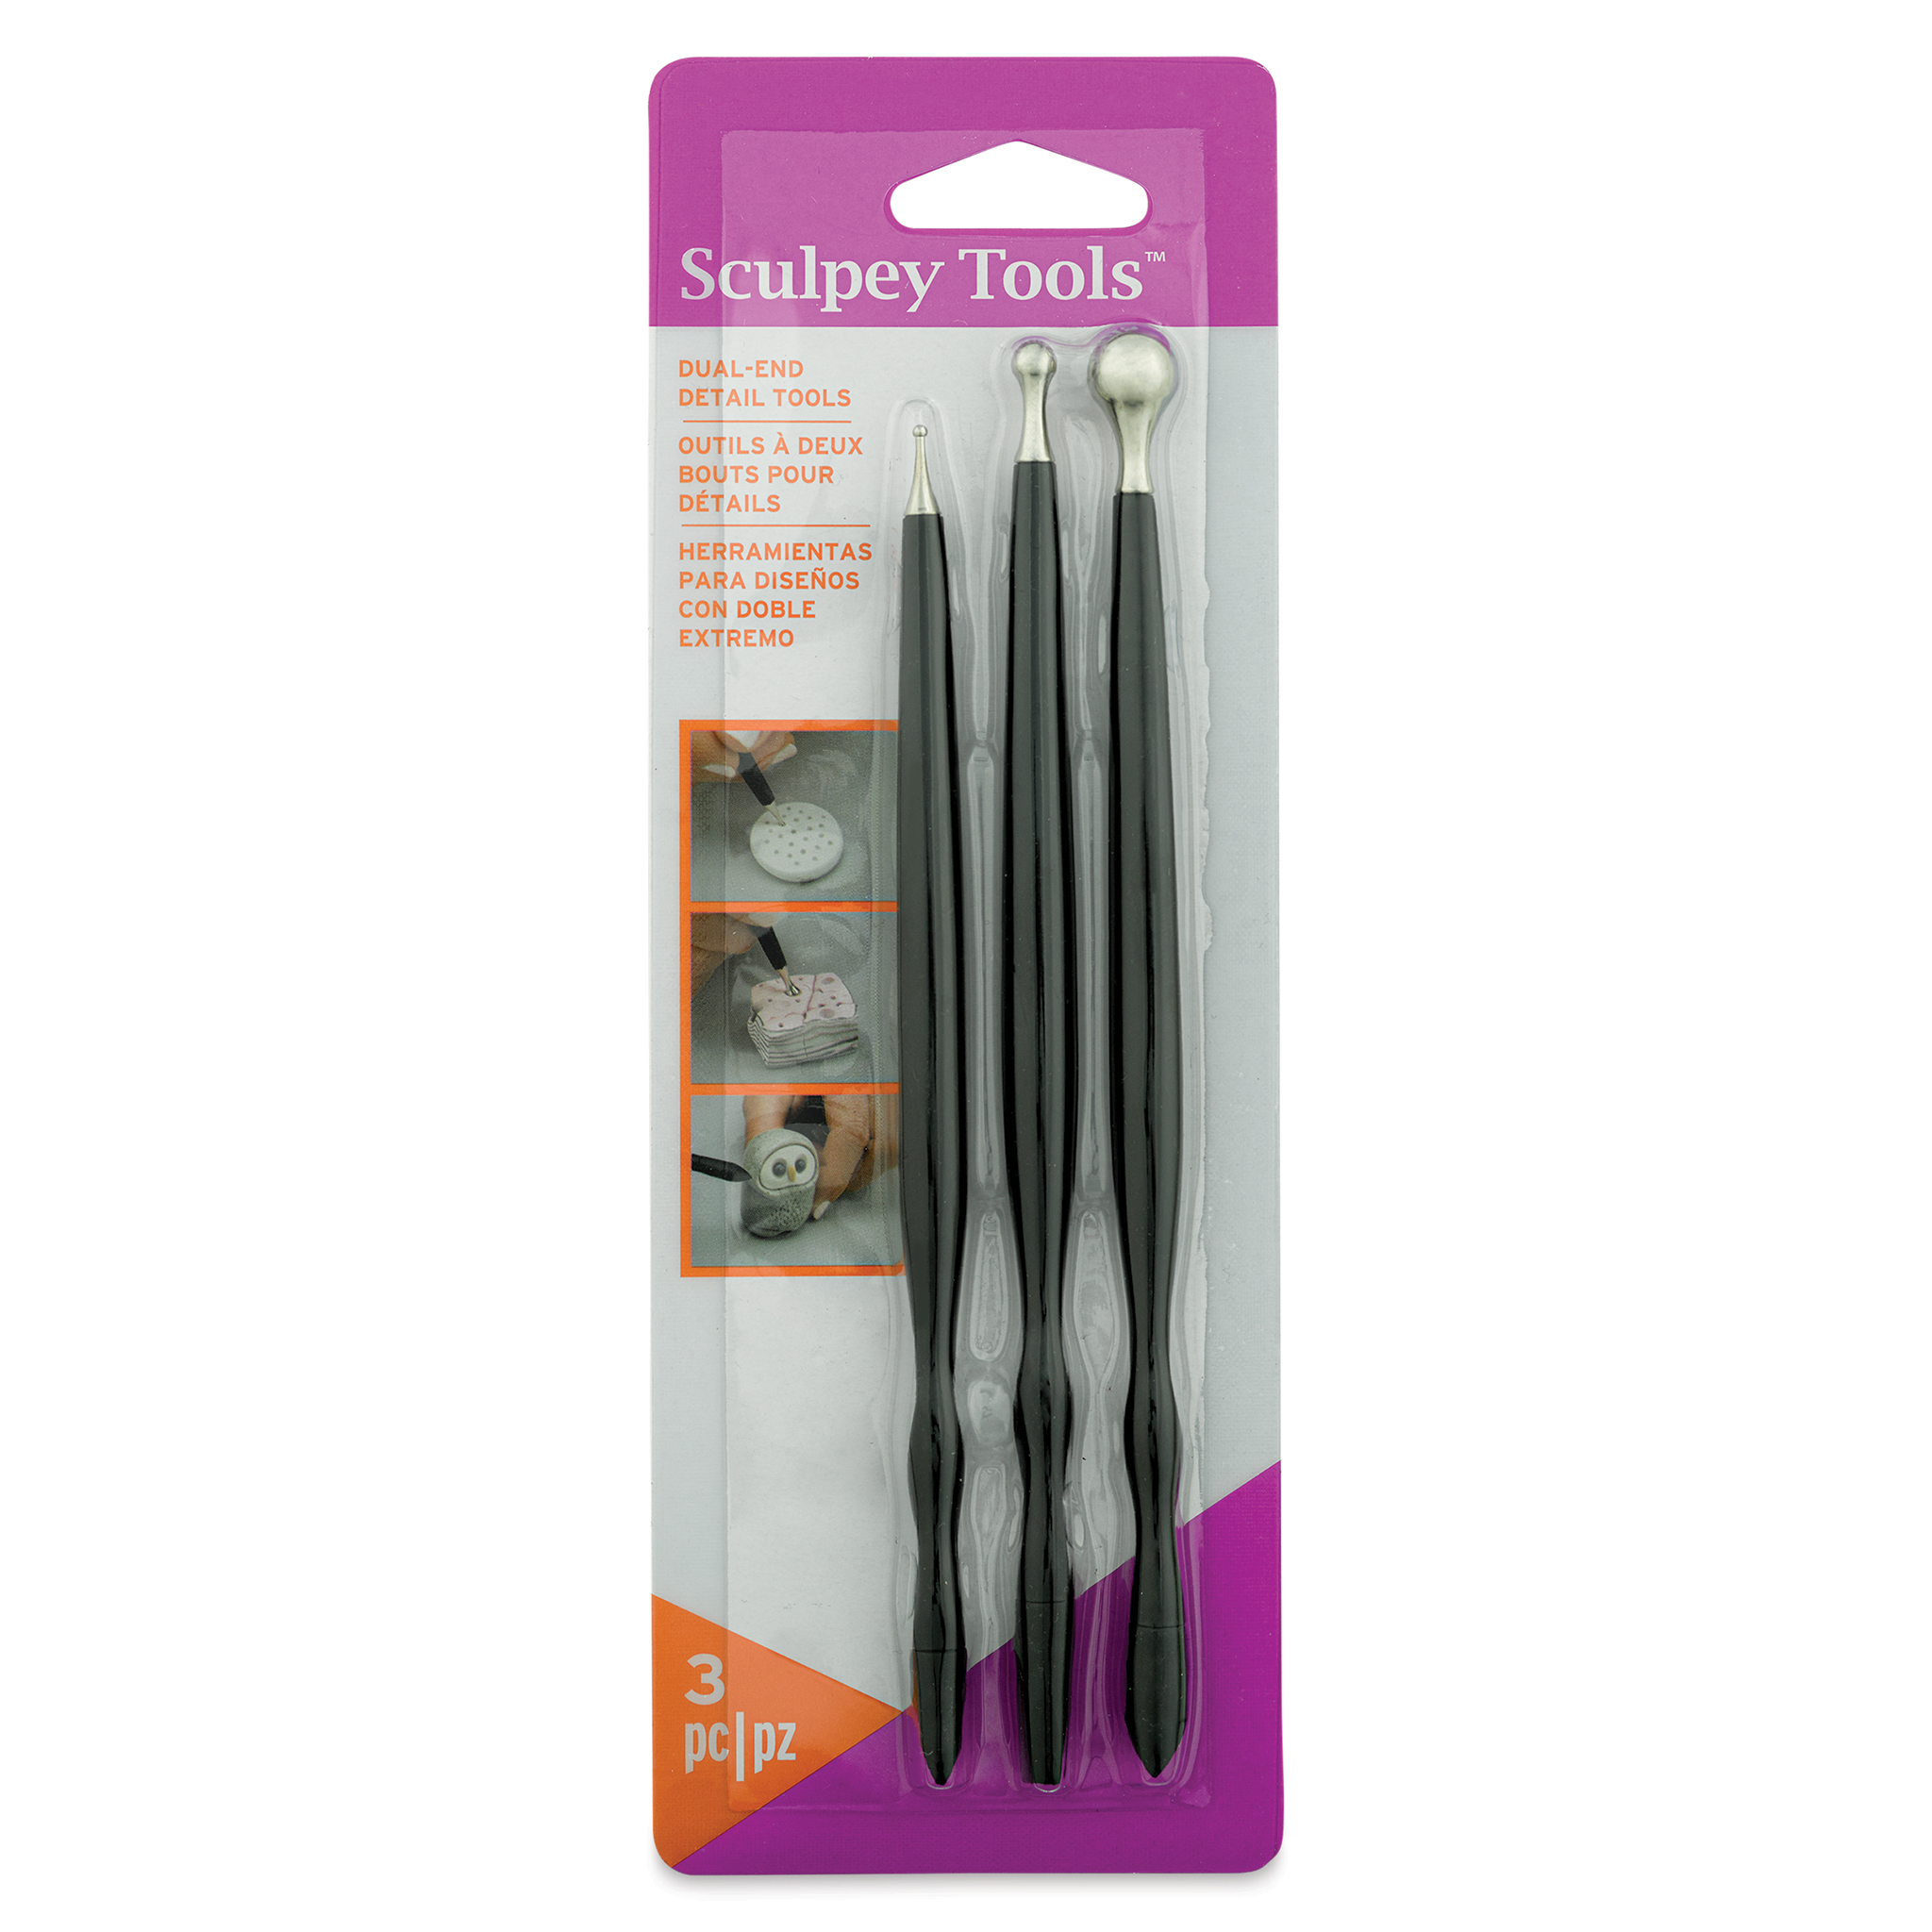 Sculpey Tools Clay Blades, 3 blades included - flexible, wavy and rigid  blade, polymer oven-bake clay tool, great for all skill levels and craft